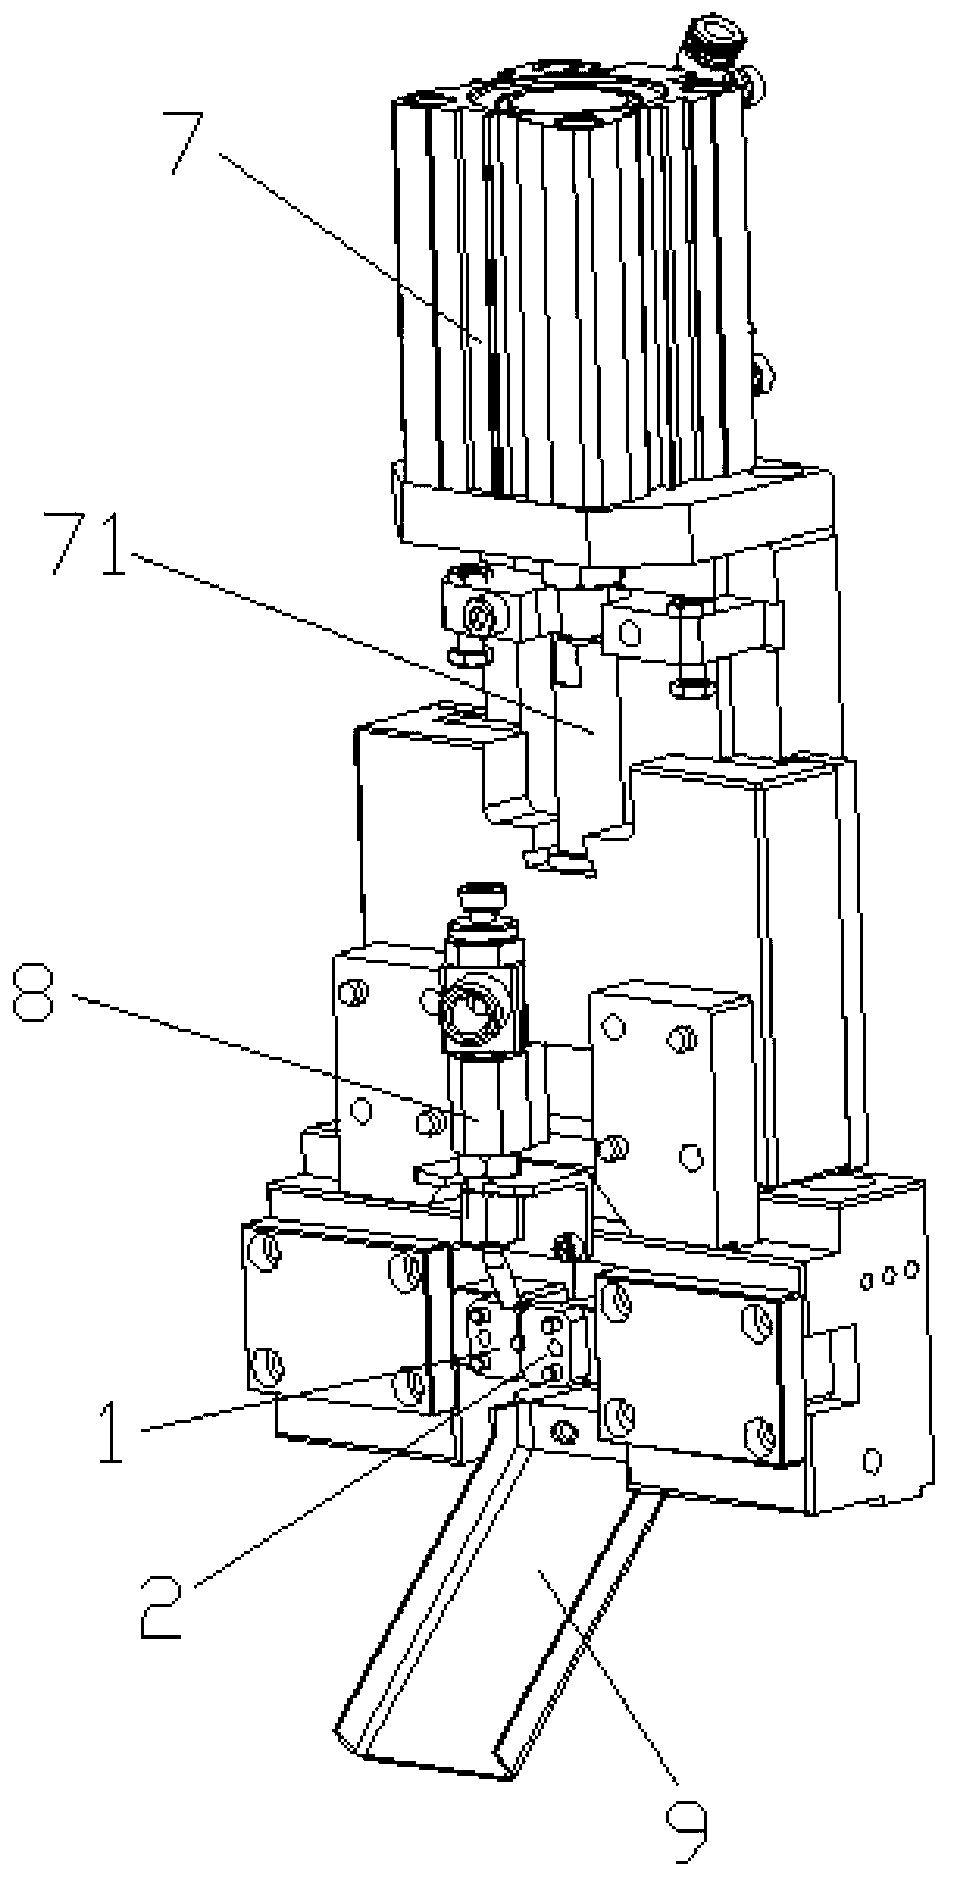 Product positioning and clamping device